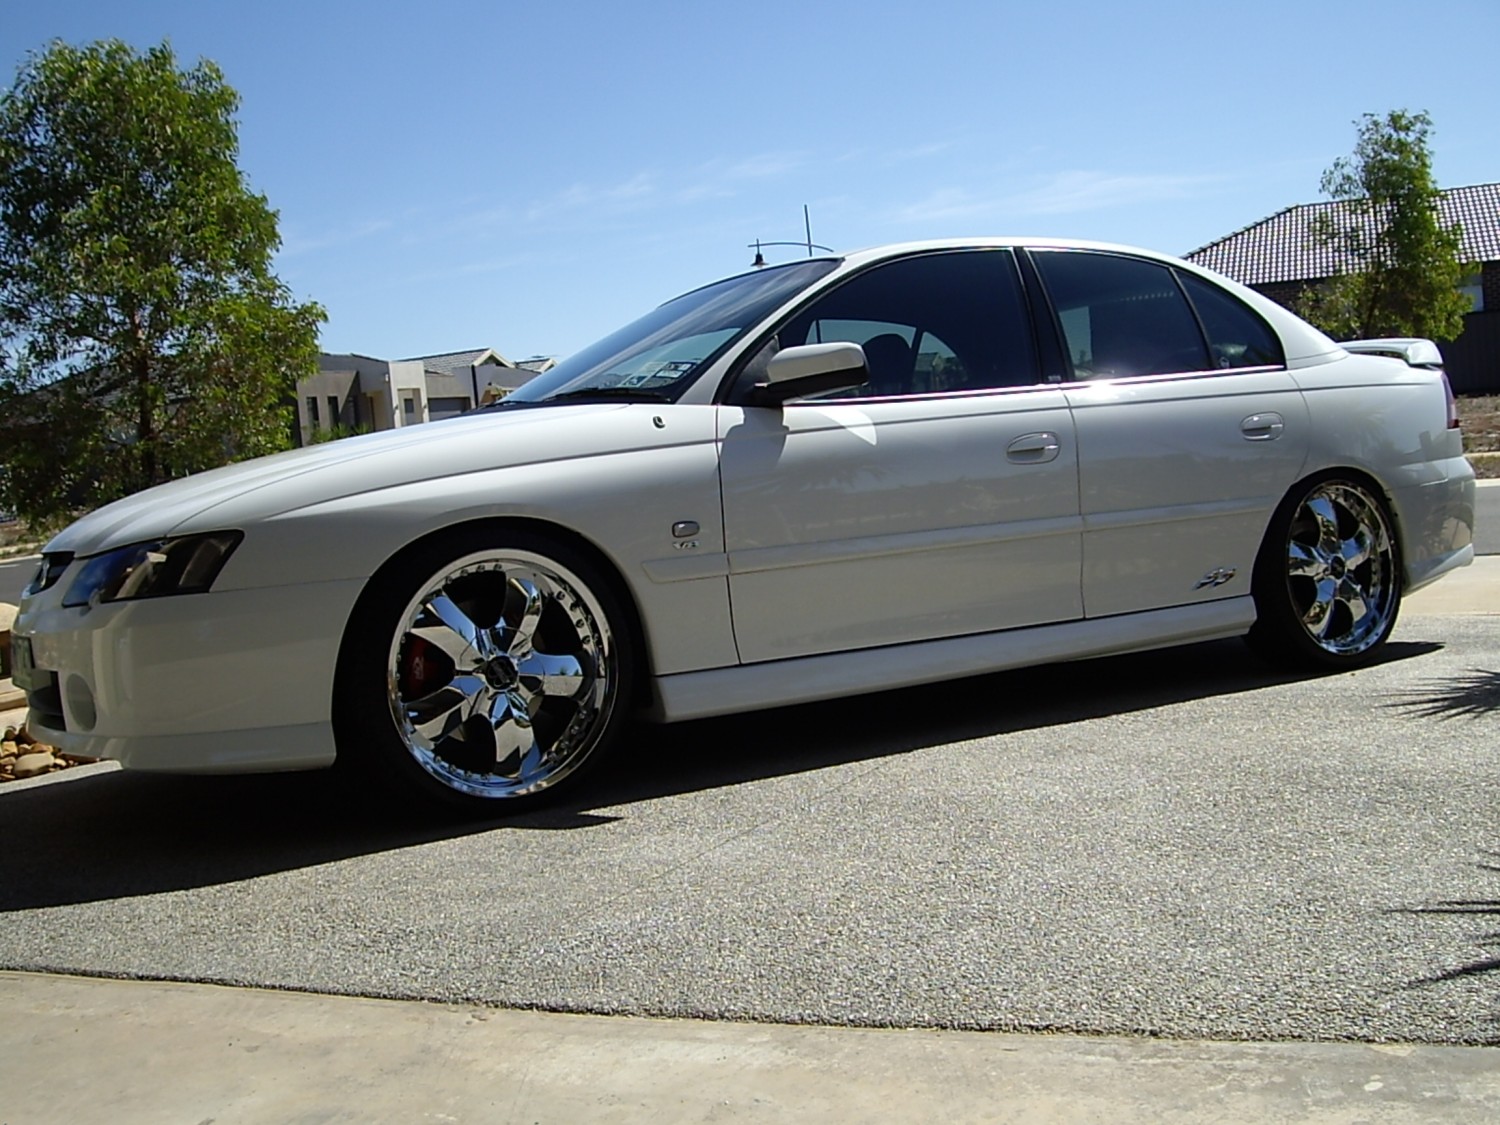 2004-holden-vy-ss-series-2-commodore.jpg